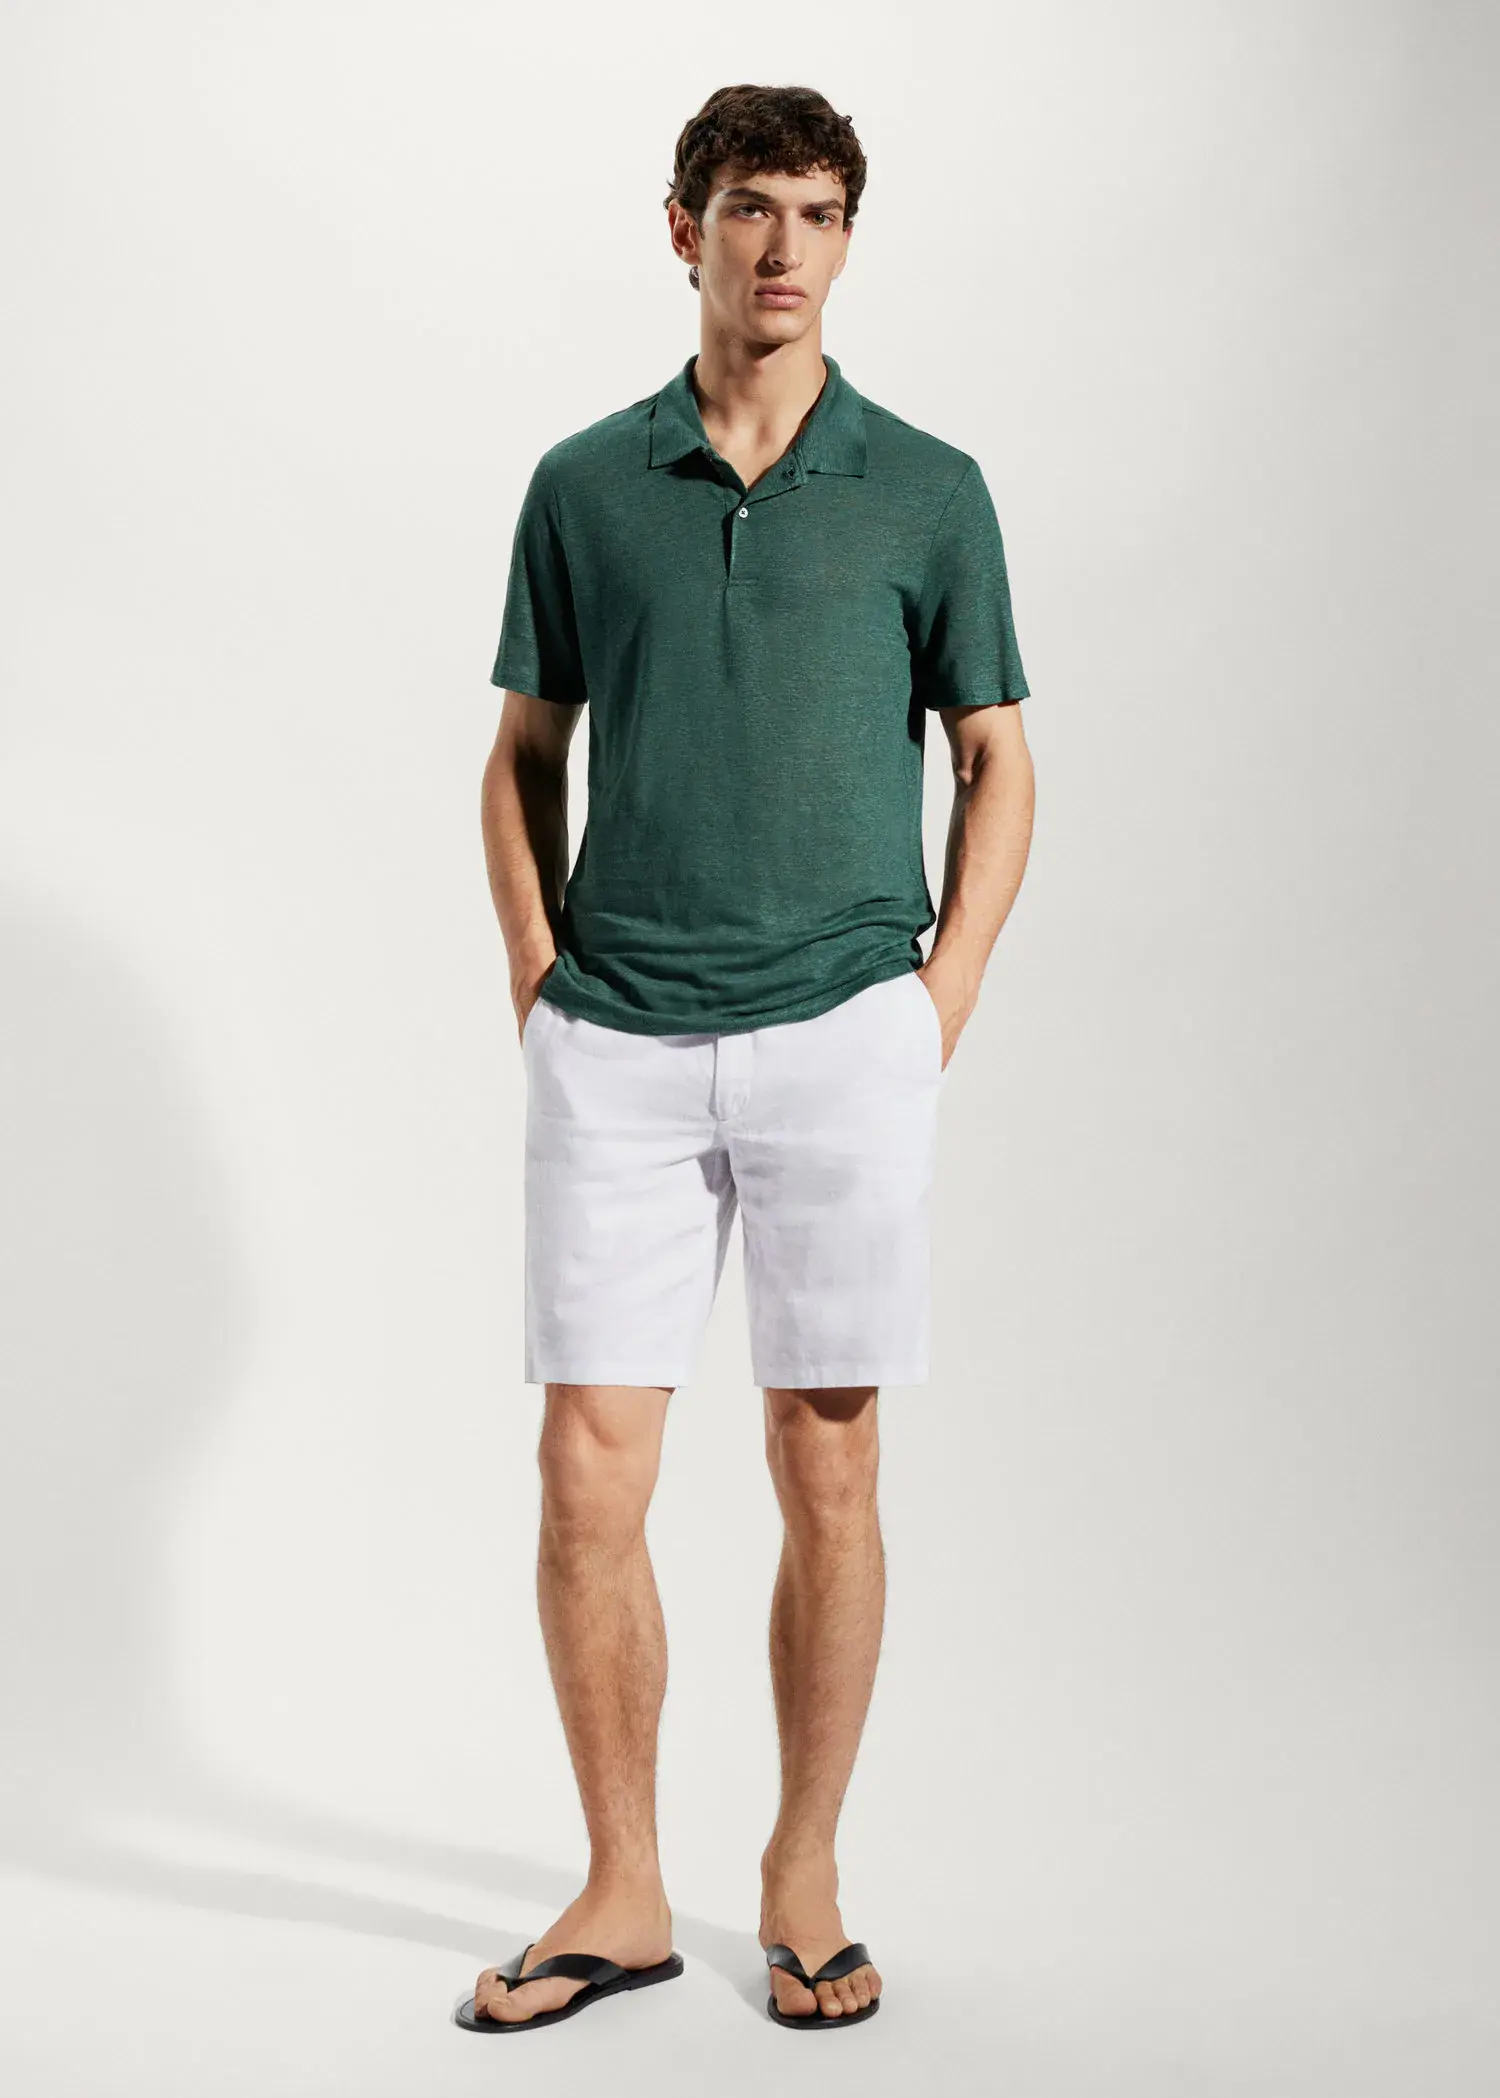 Mango Slim fit 100% linen polo shirt. a man in a green polo shirt and white shorts. 